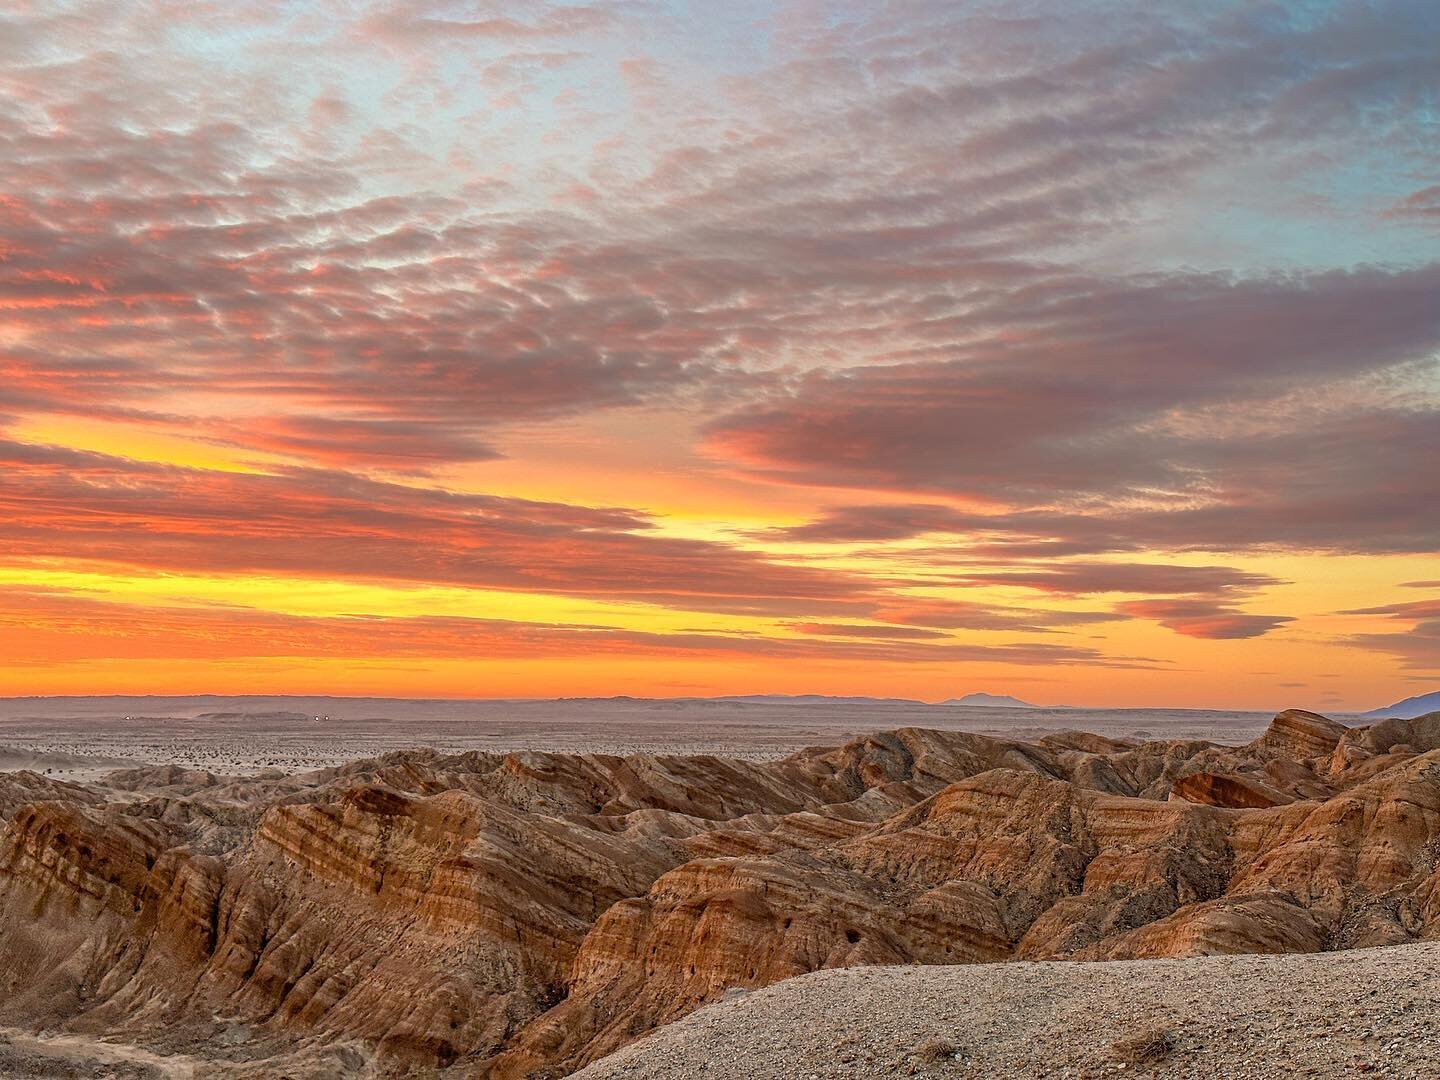 Some mornings you have to risk being late to work and stop to enjoy the beauty. With rain incoming tonight, the sunrise was quite the show. Happy Tuesday! #tuesday #sunrise #sky #clouds #badlands #desert #canyons #anzaborregodesertstatepark #anzaborr